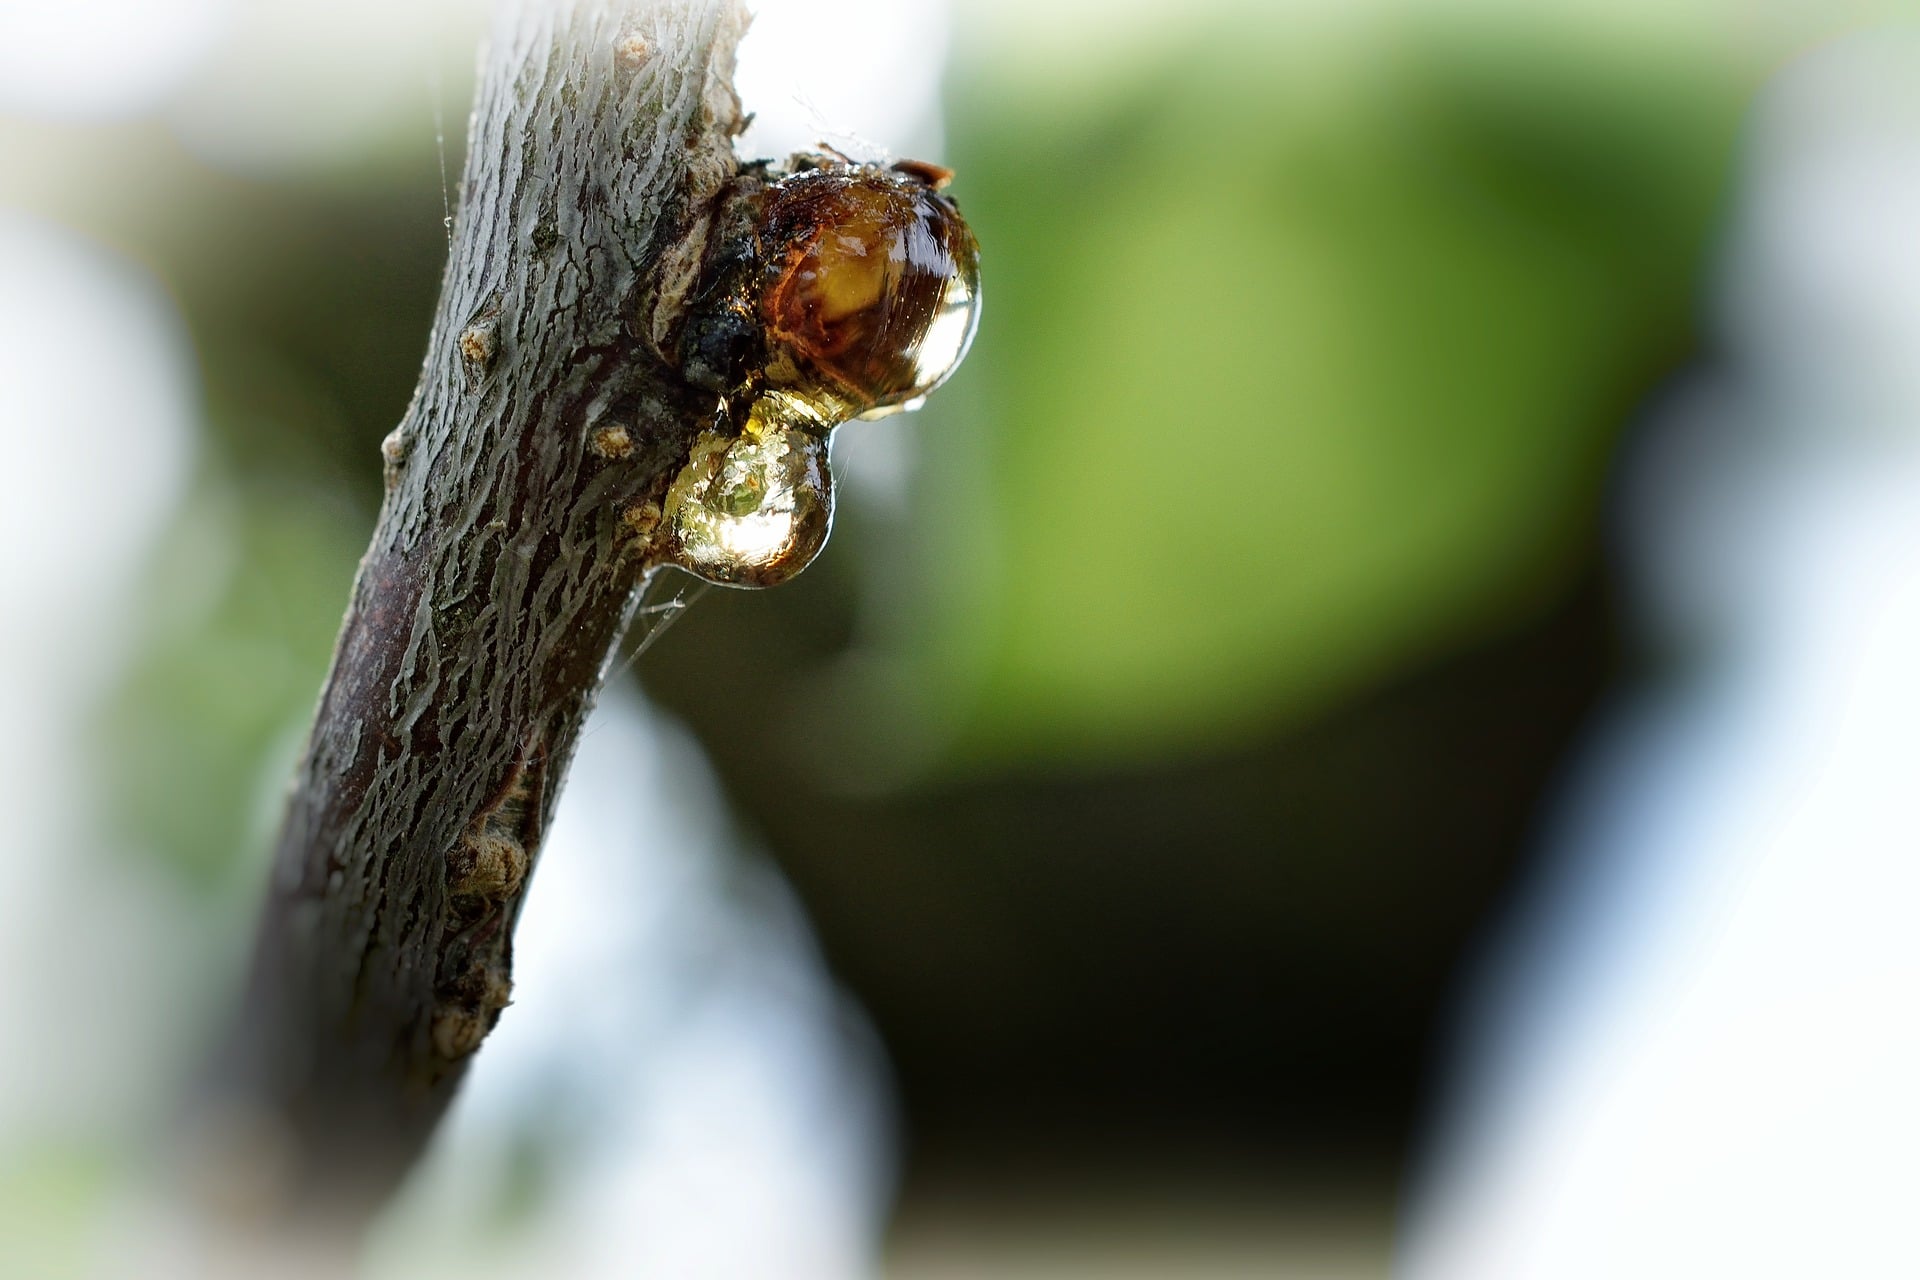 Drops of sap poised to drop from a tree branch.